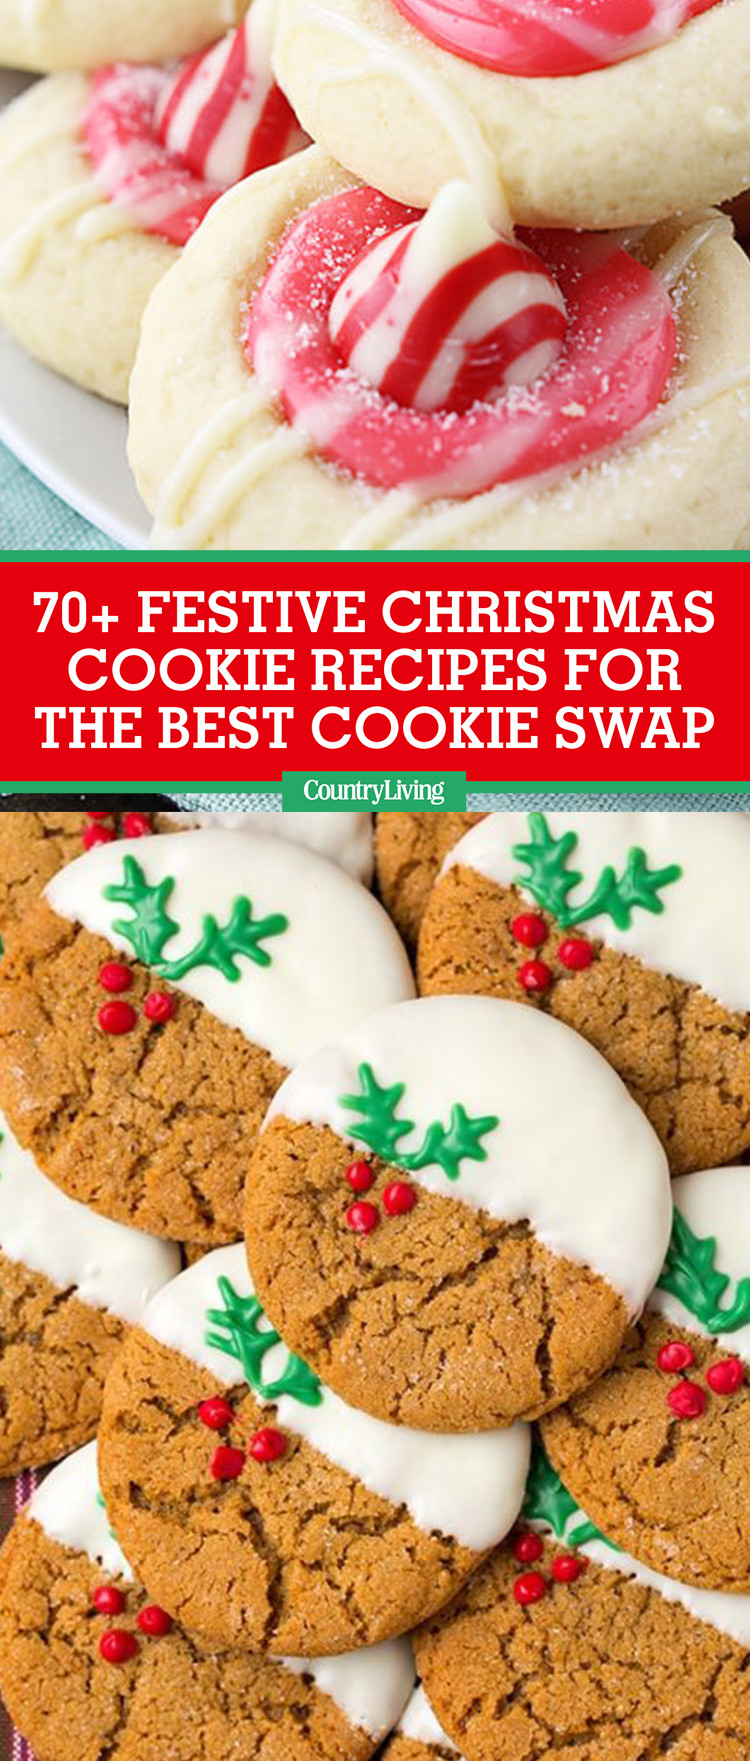 Popular Christmas Cookies Recipes
 70 Best Christmas Cookie Recipes 2017 Easy Ideas for